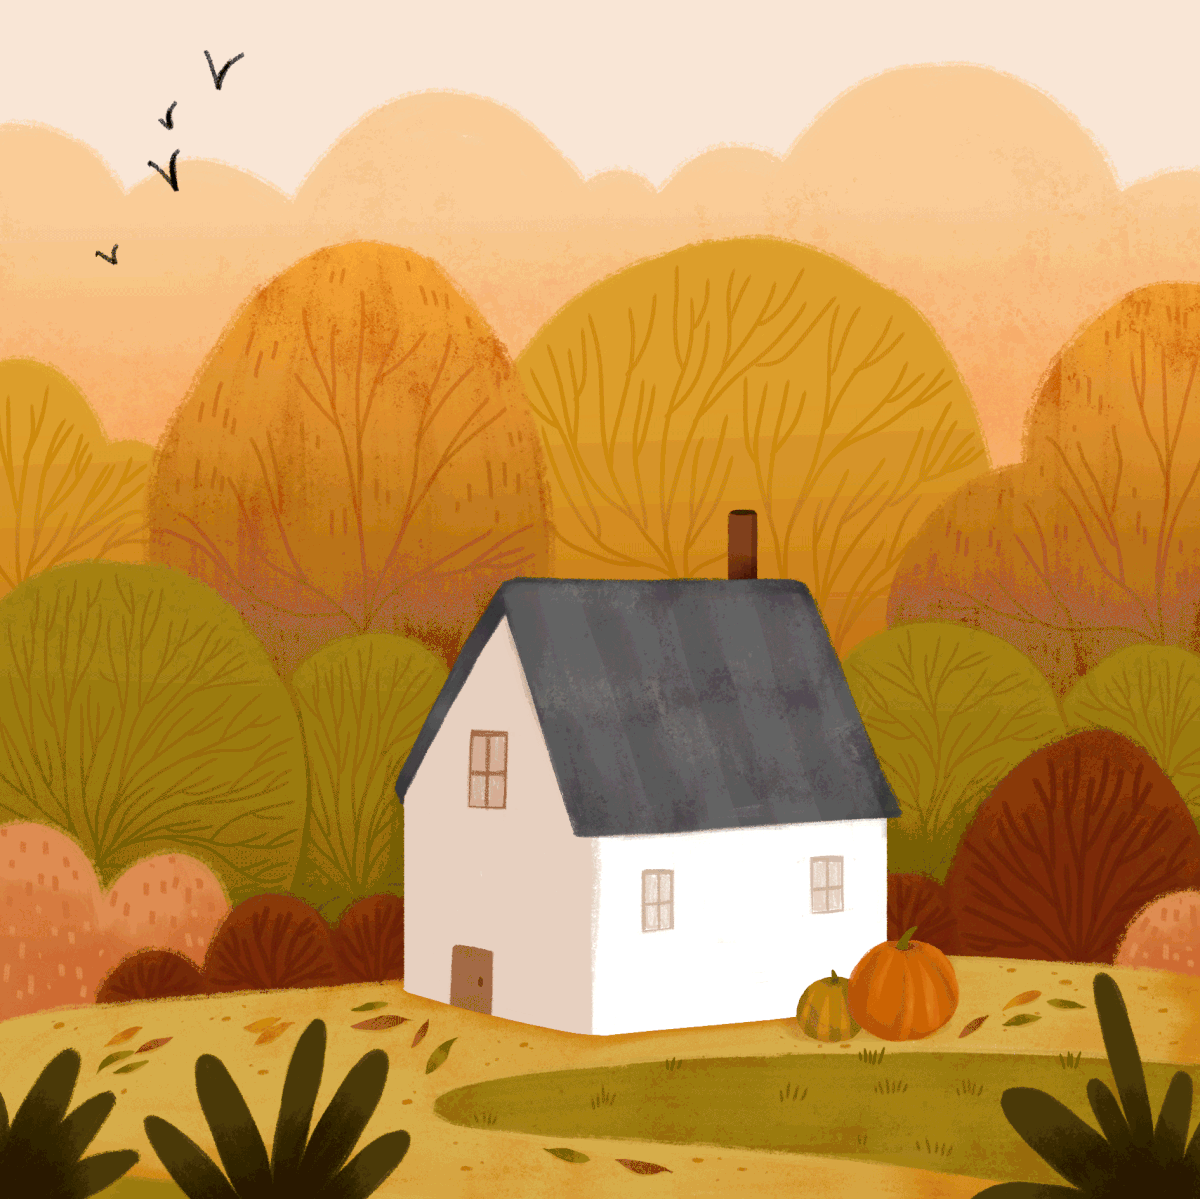 home illustrated gifs on behance animated barn cat